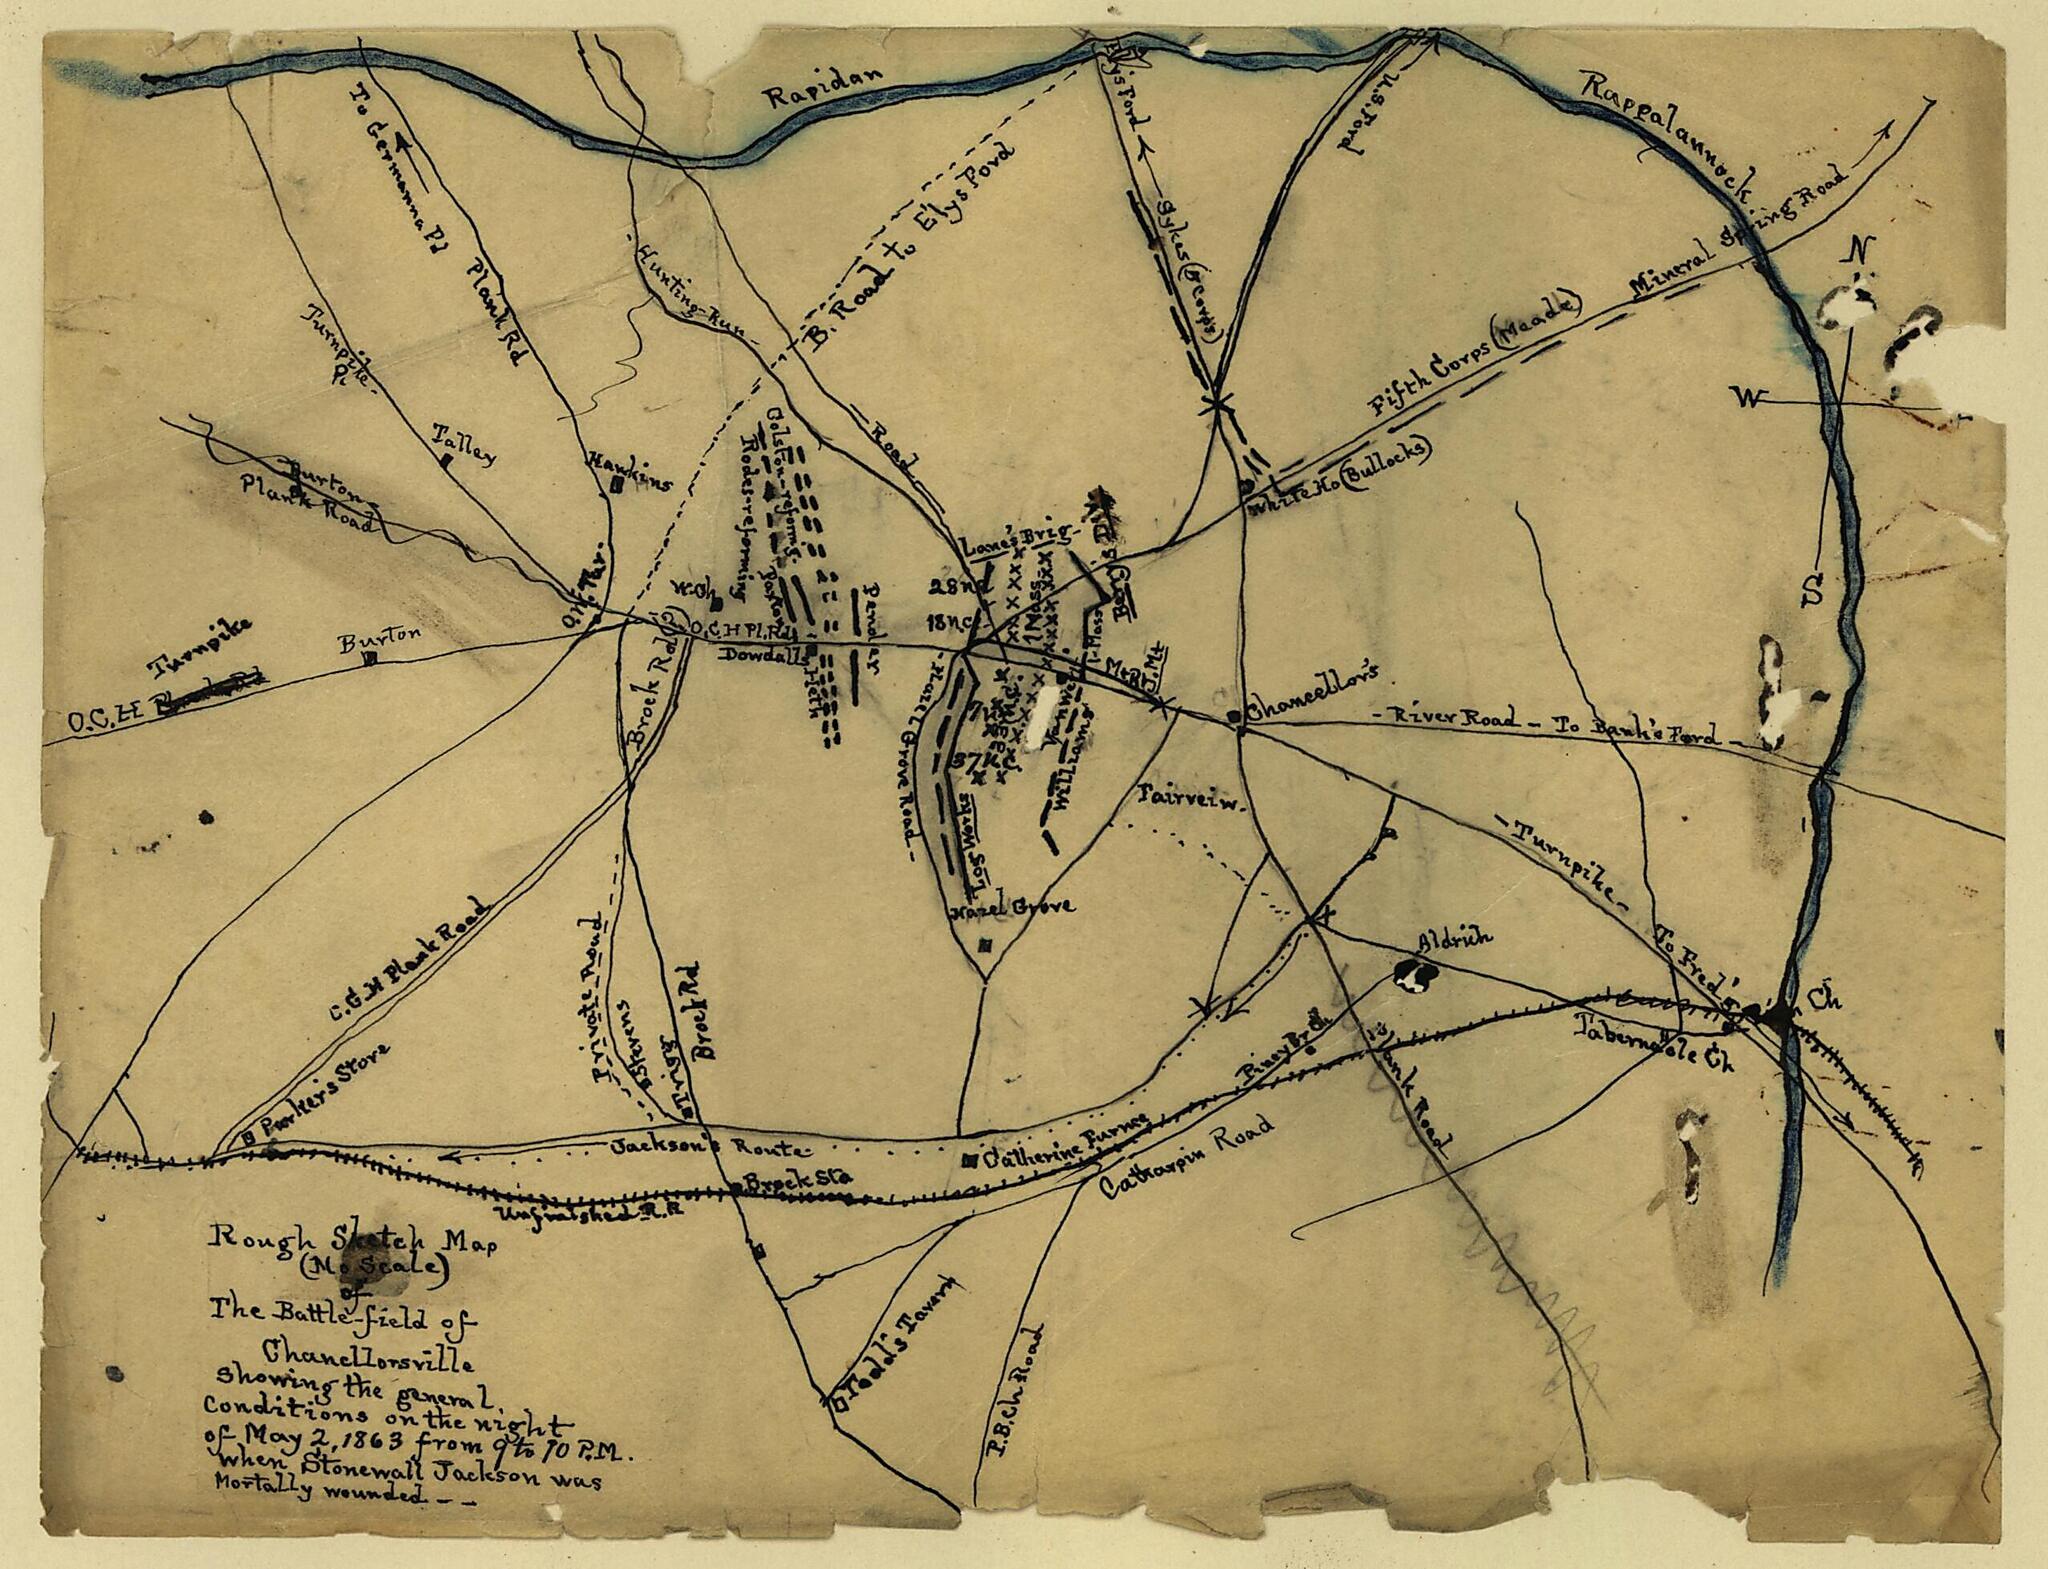 This old map of The Battlefield of Chancellorsville from 05-02 was created by Robert Goldthwaite Carter in 05-02